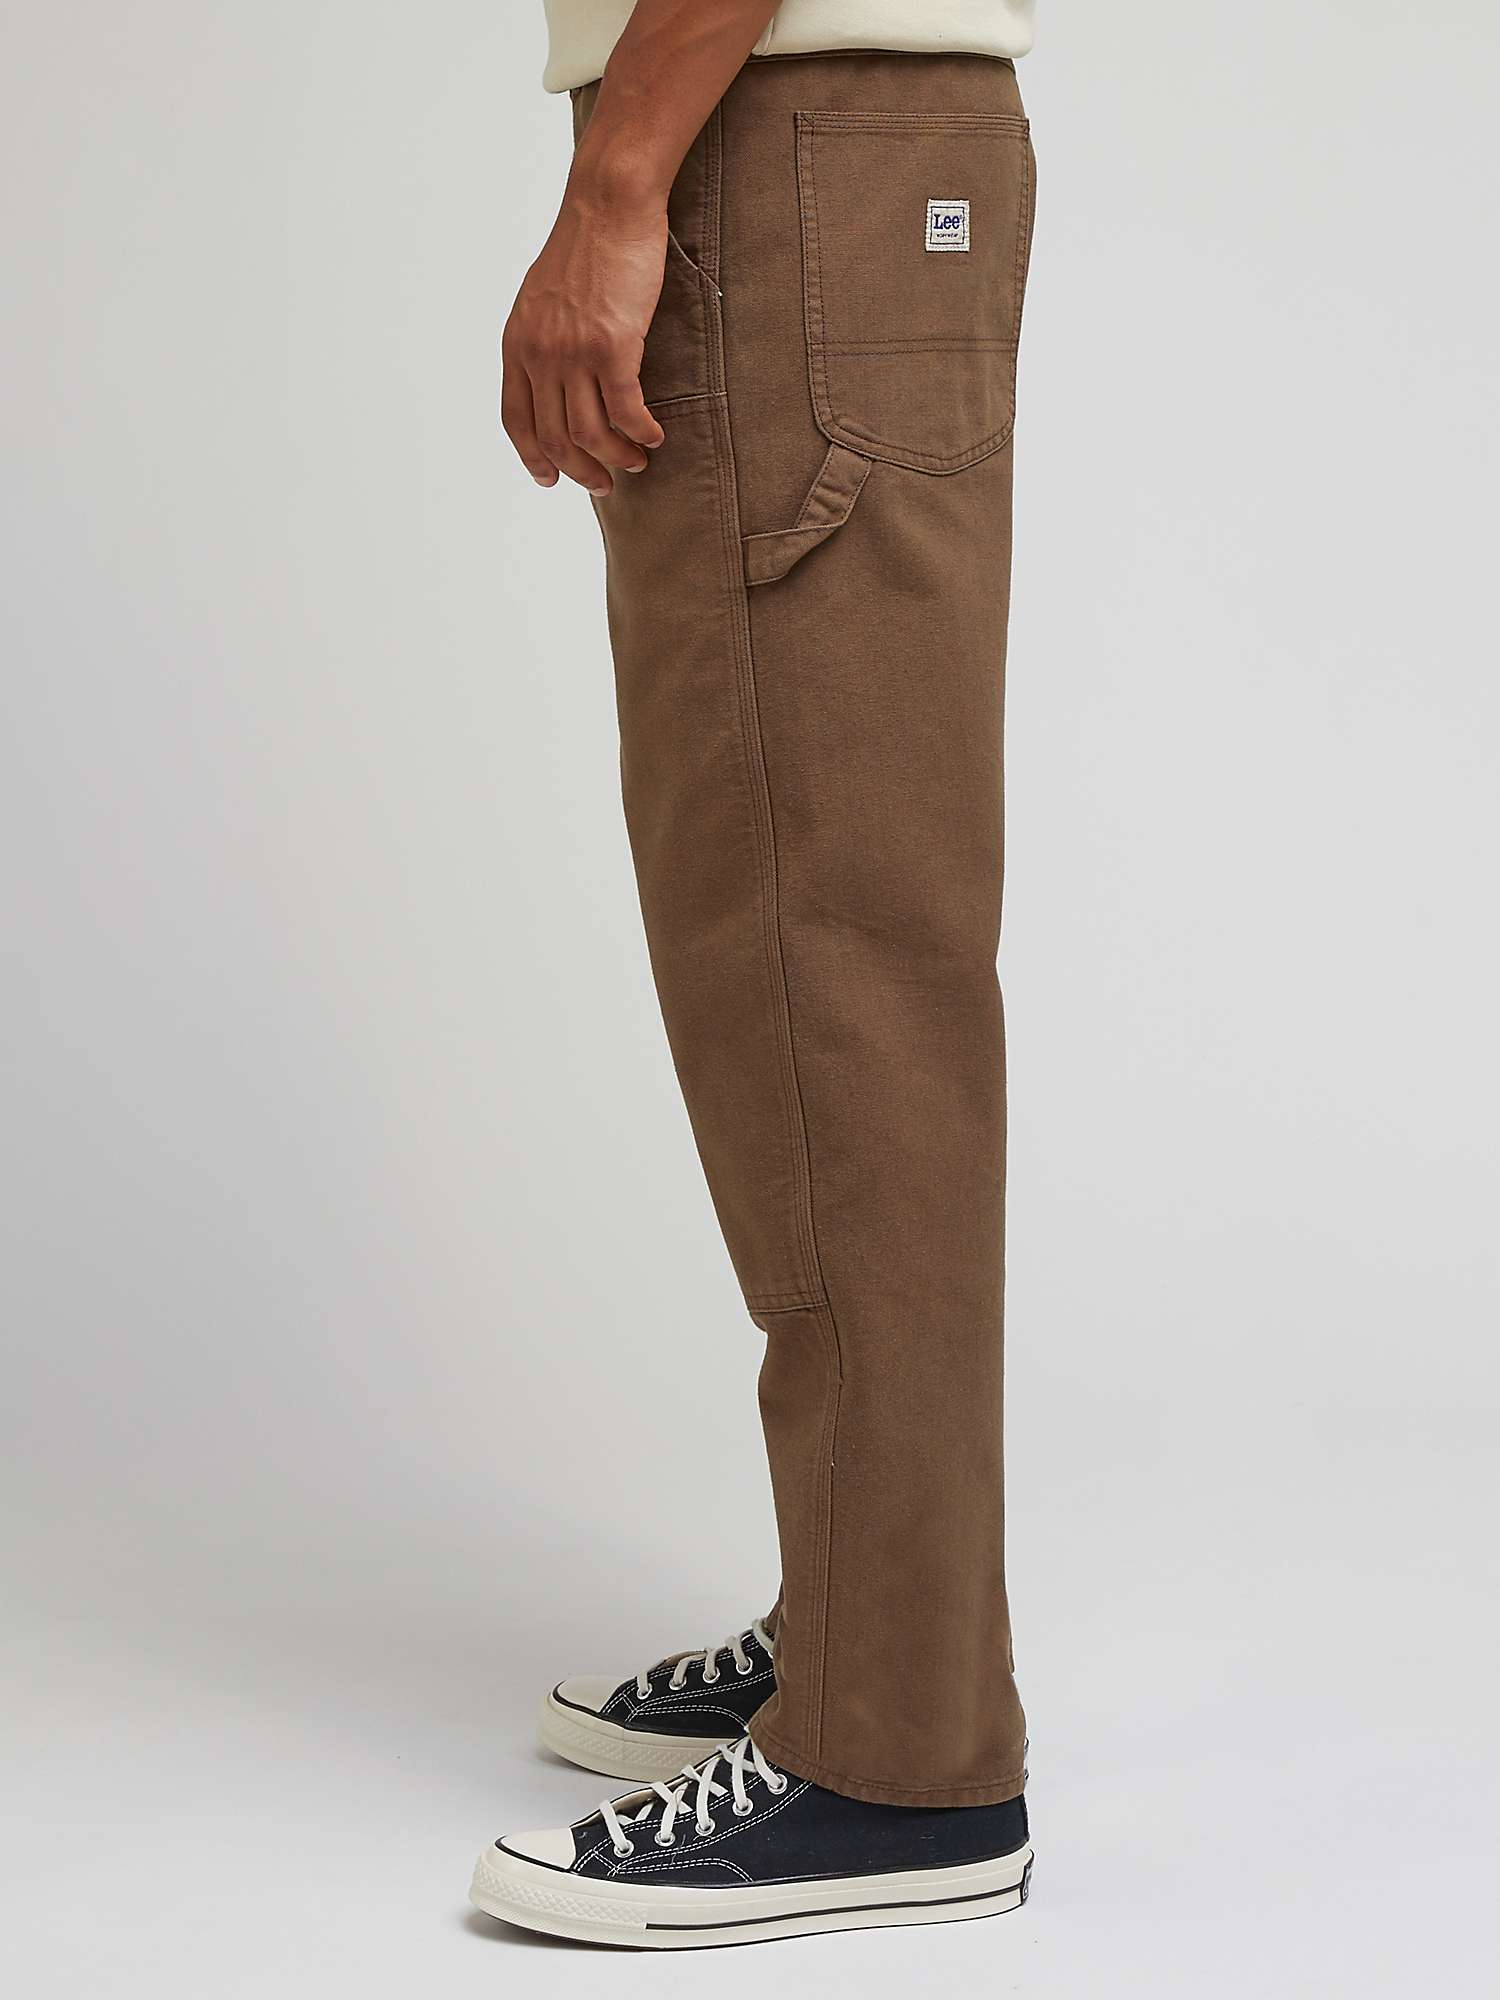 Buy Lee Pannelled Carpenter Trousers, Truffle Online at johnlewis.com